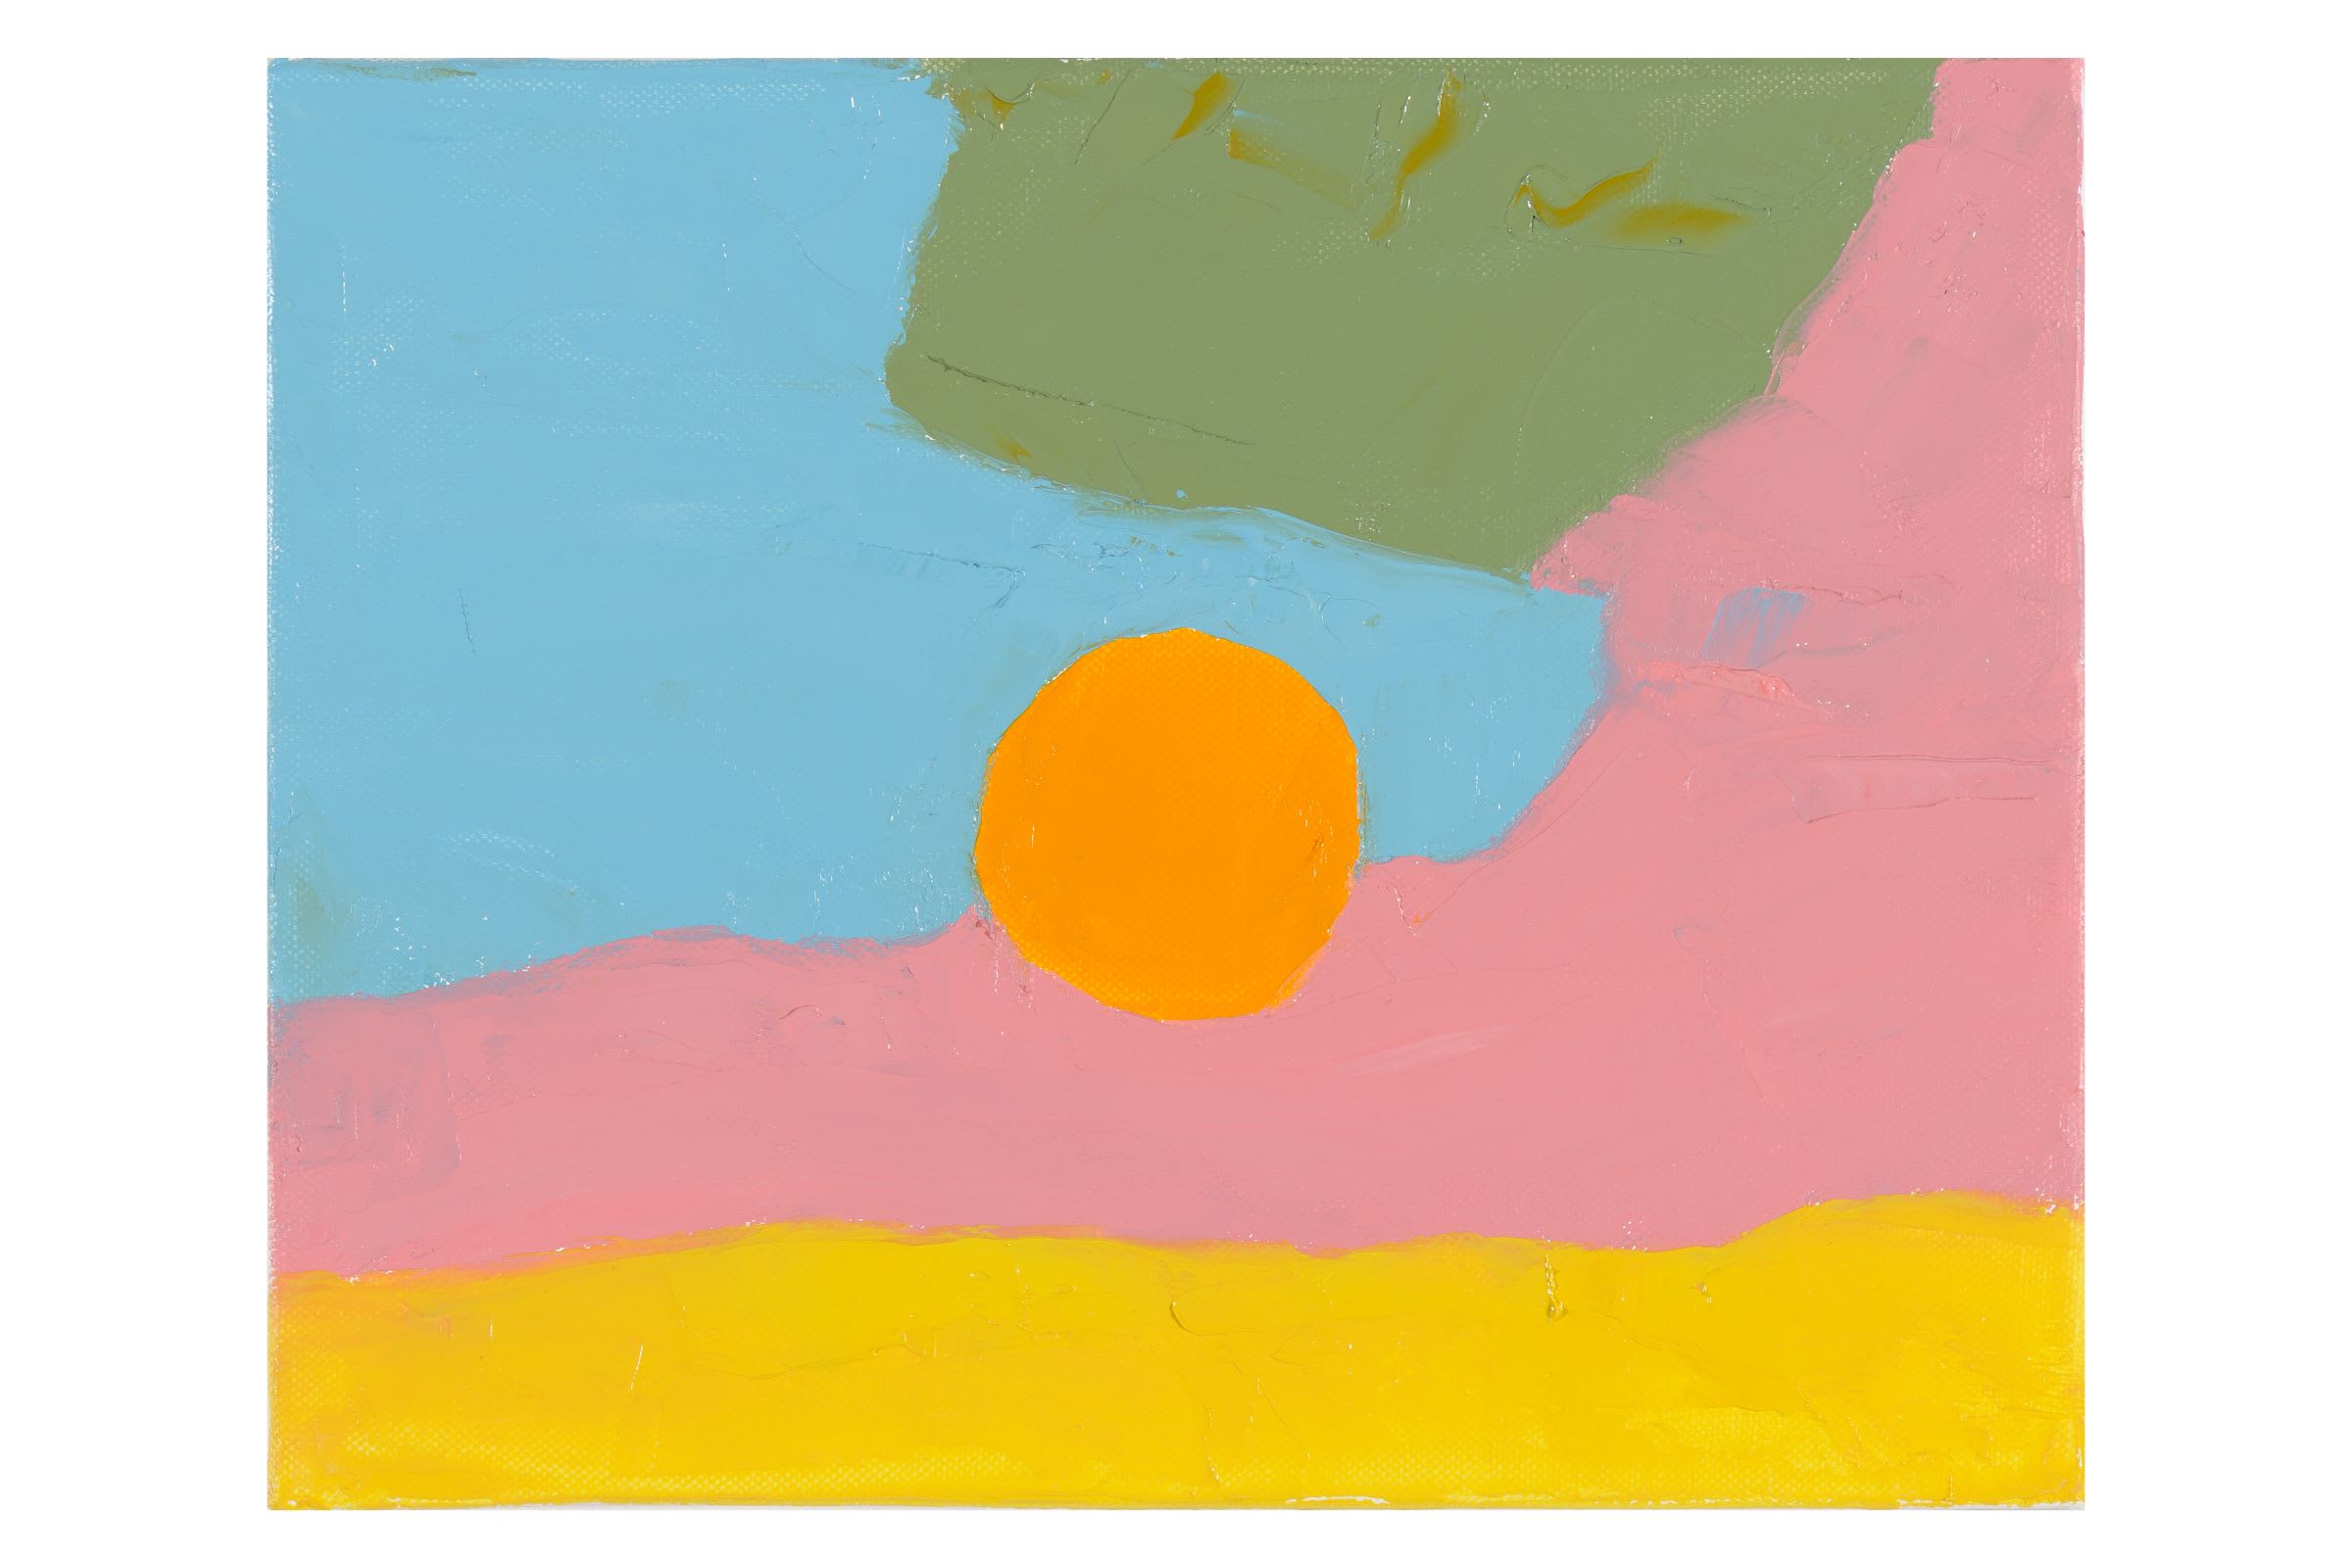 Etel Adnan, Untitled, 2010. Courtesy the estate of the artist and Sfeir-Semler Gallery.